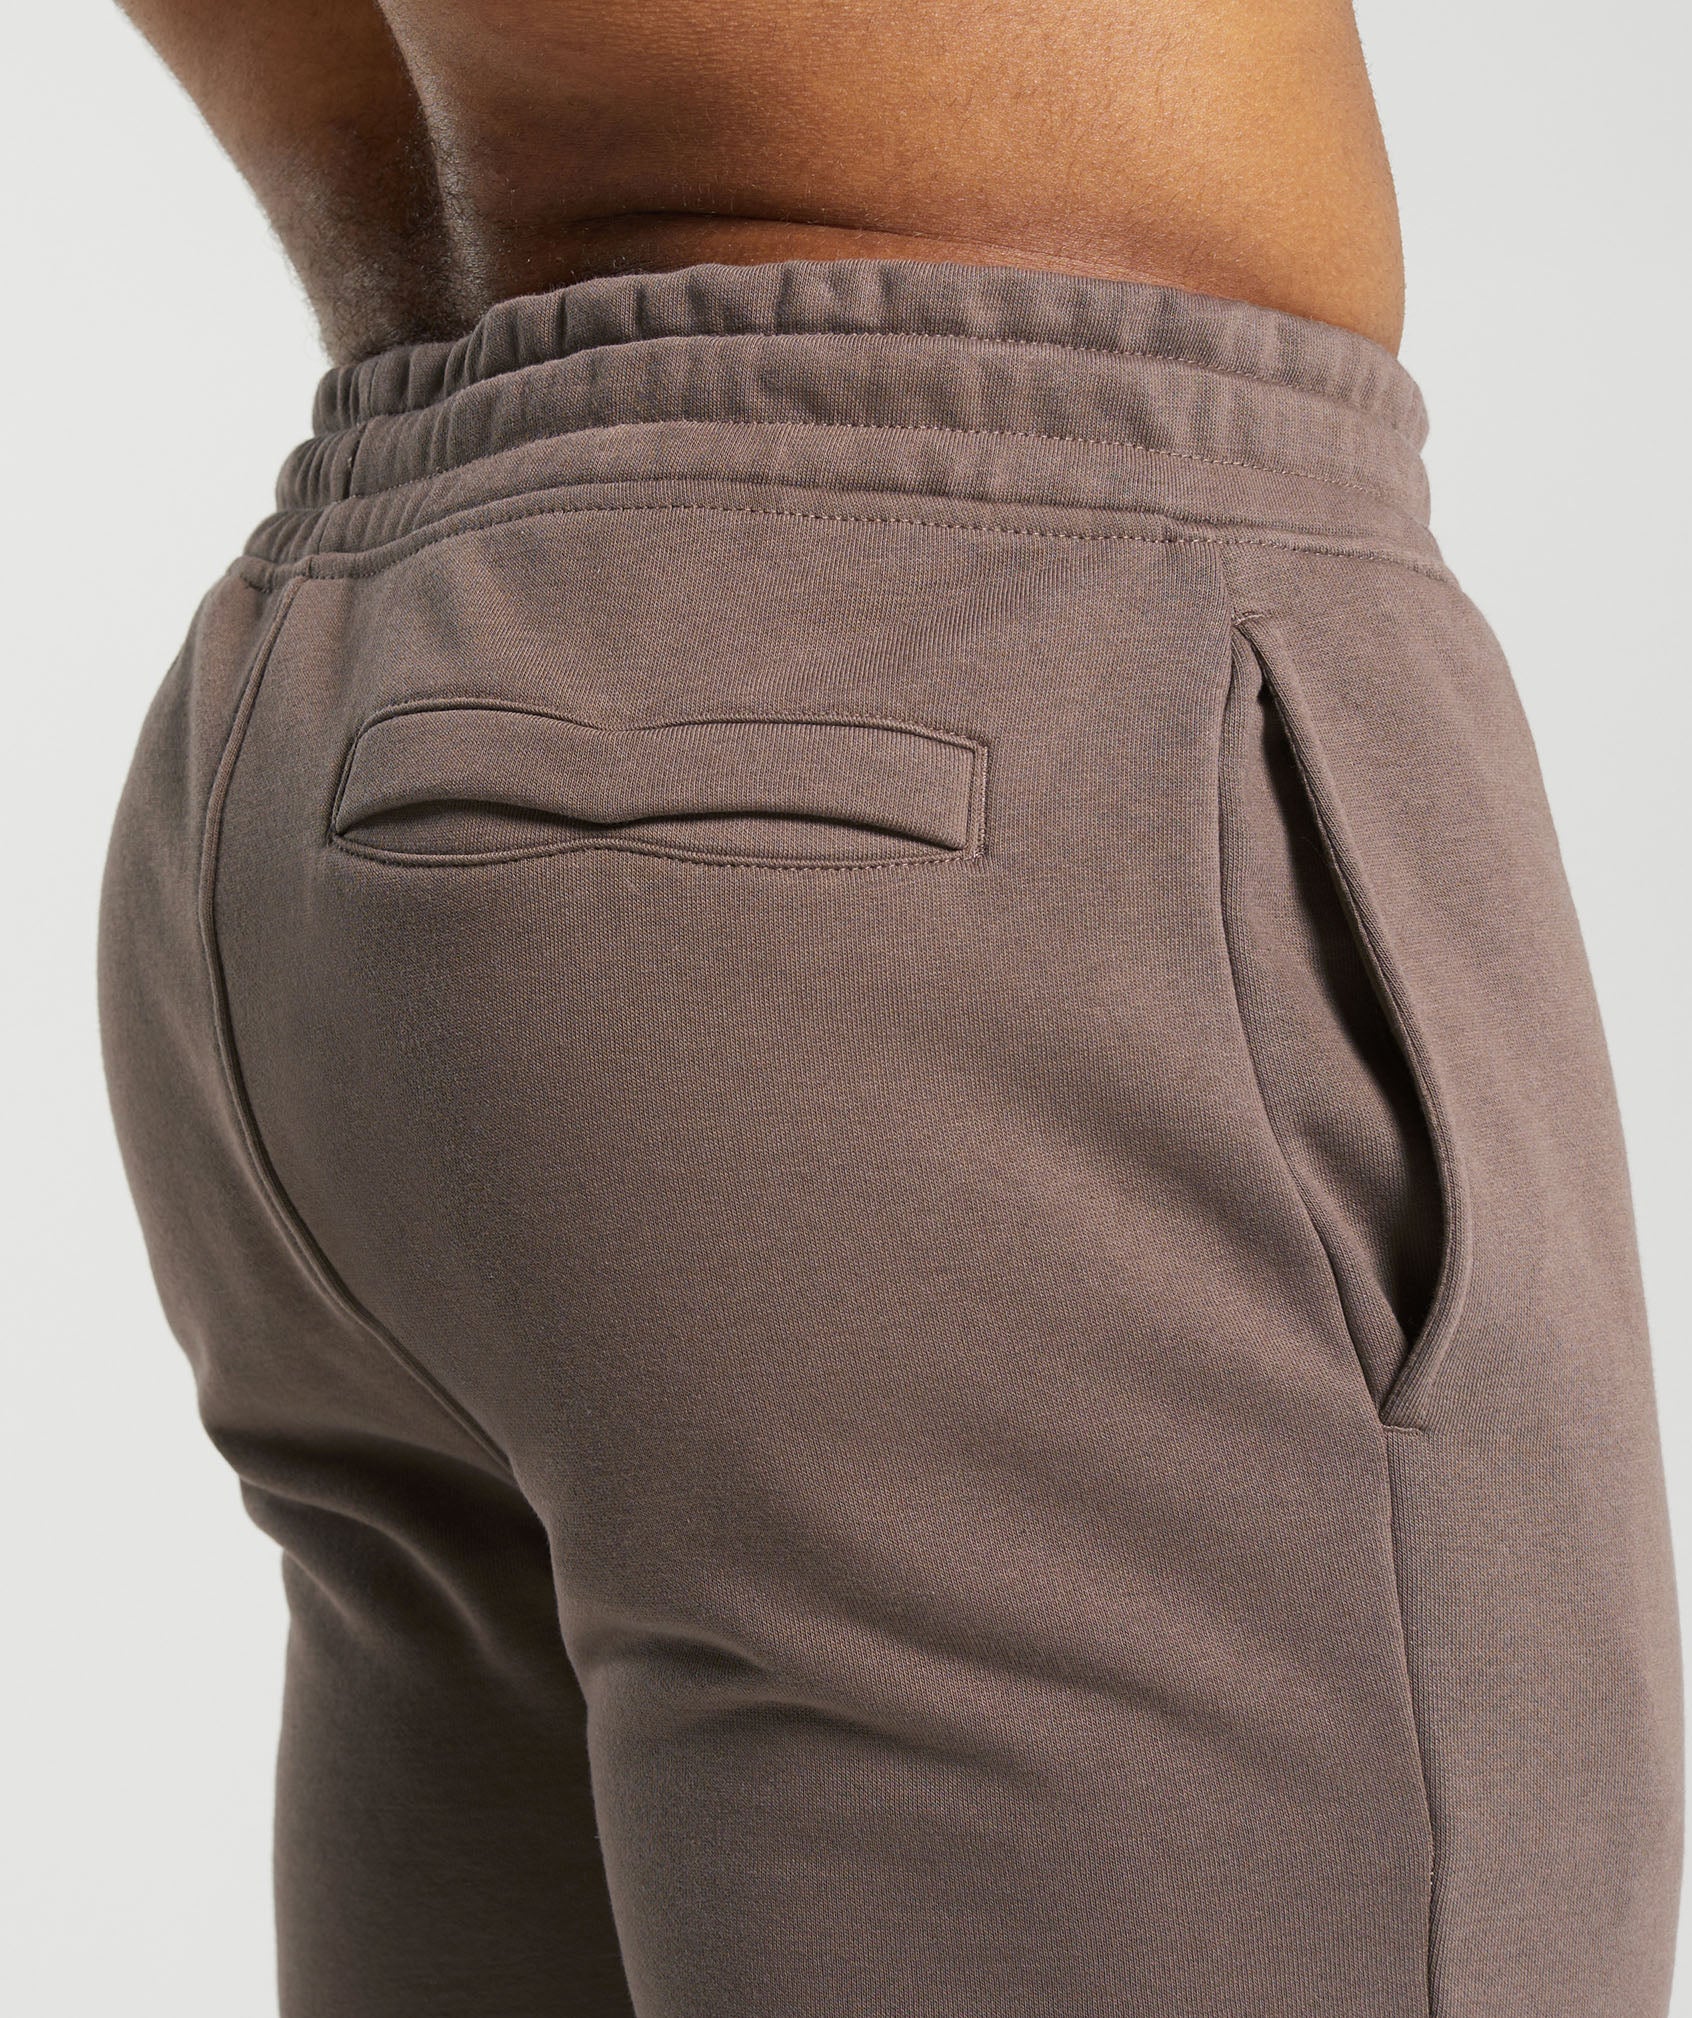 Crest Joggers in Truffle Brown - view 5